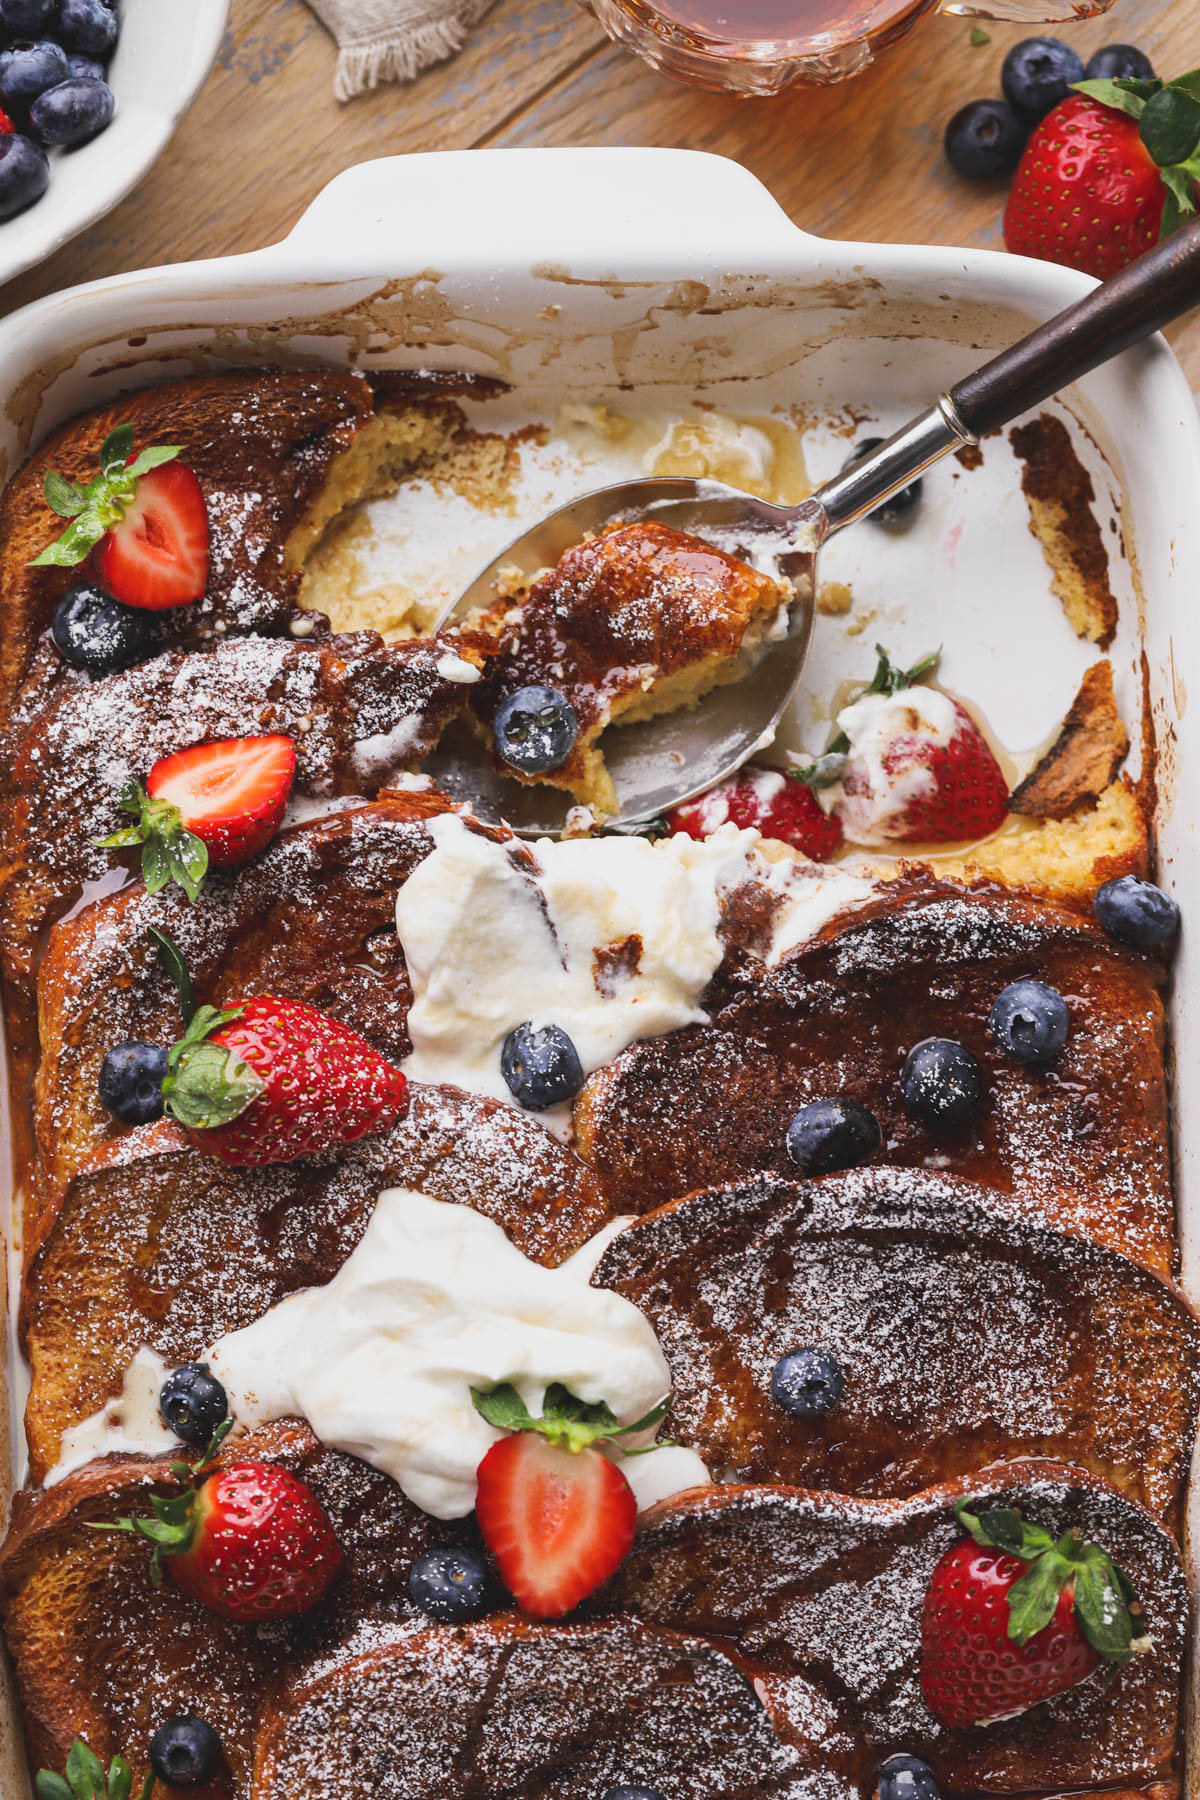 Baked brioche French toast bake with maple syrup, berries and powdered sugar.  